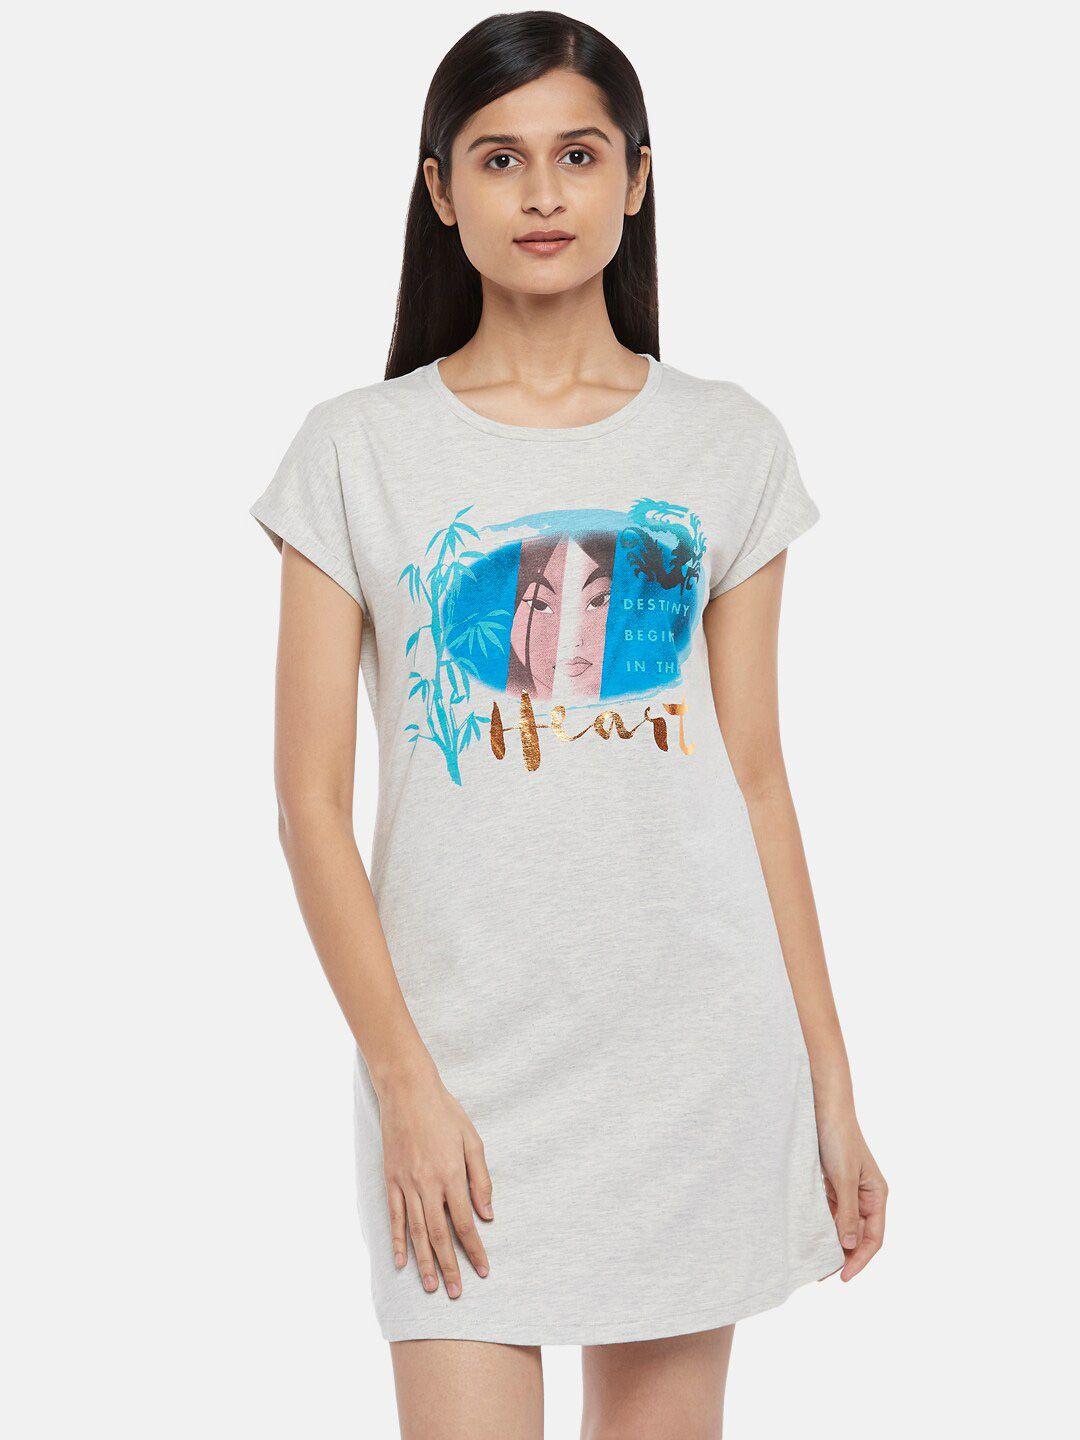 dreamz by pantaloons graphic printed pure cotton t-shirt nightdress